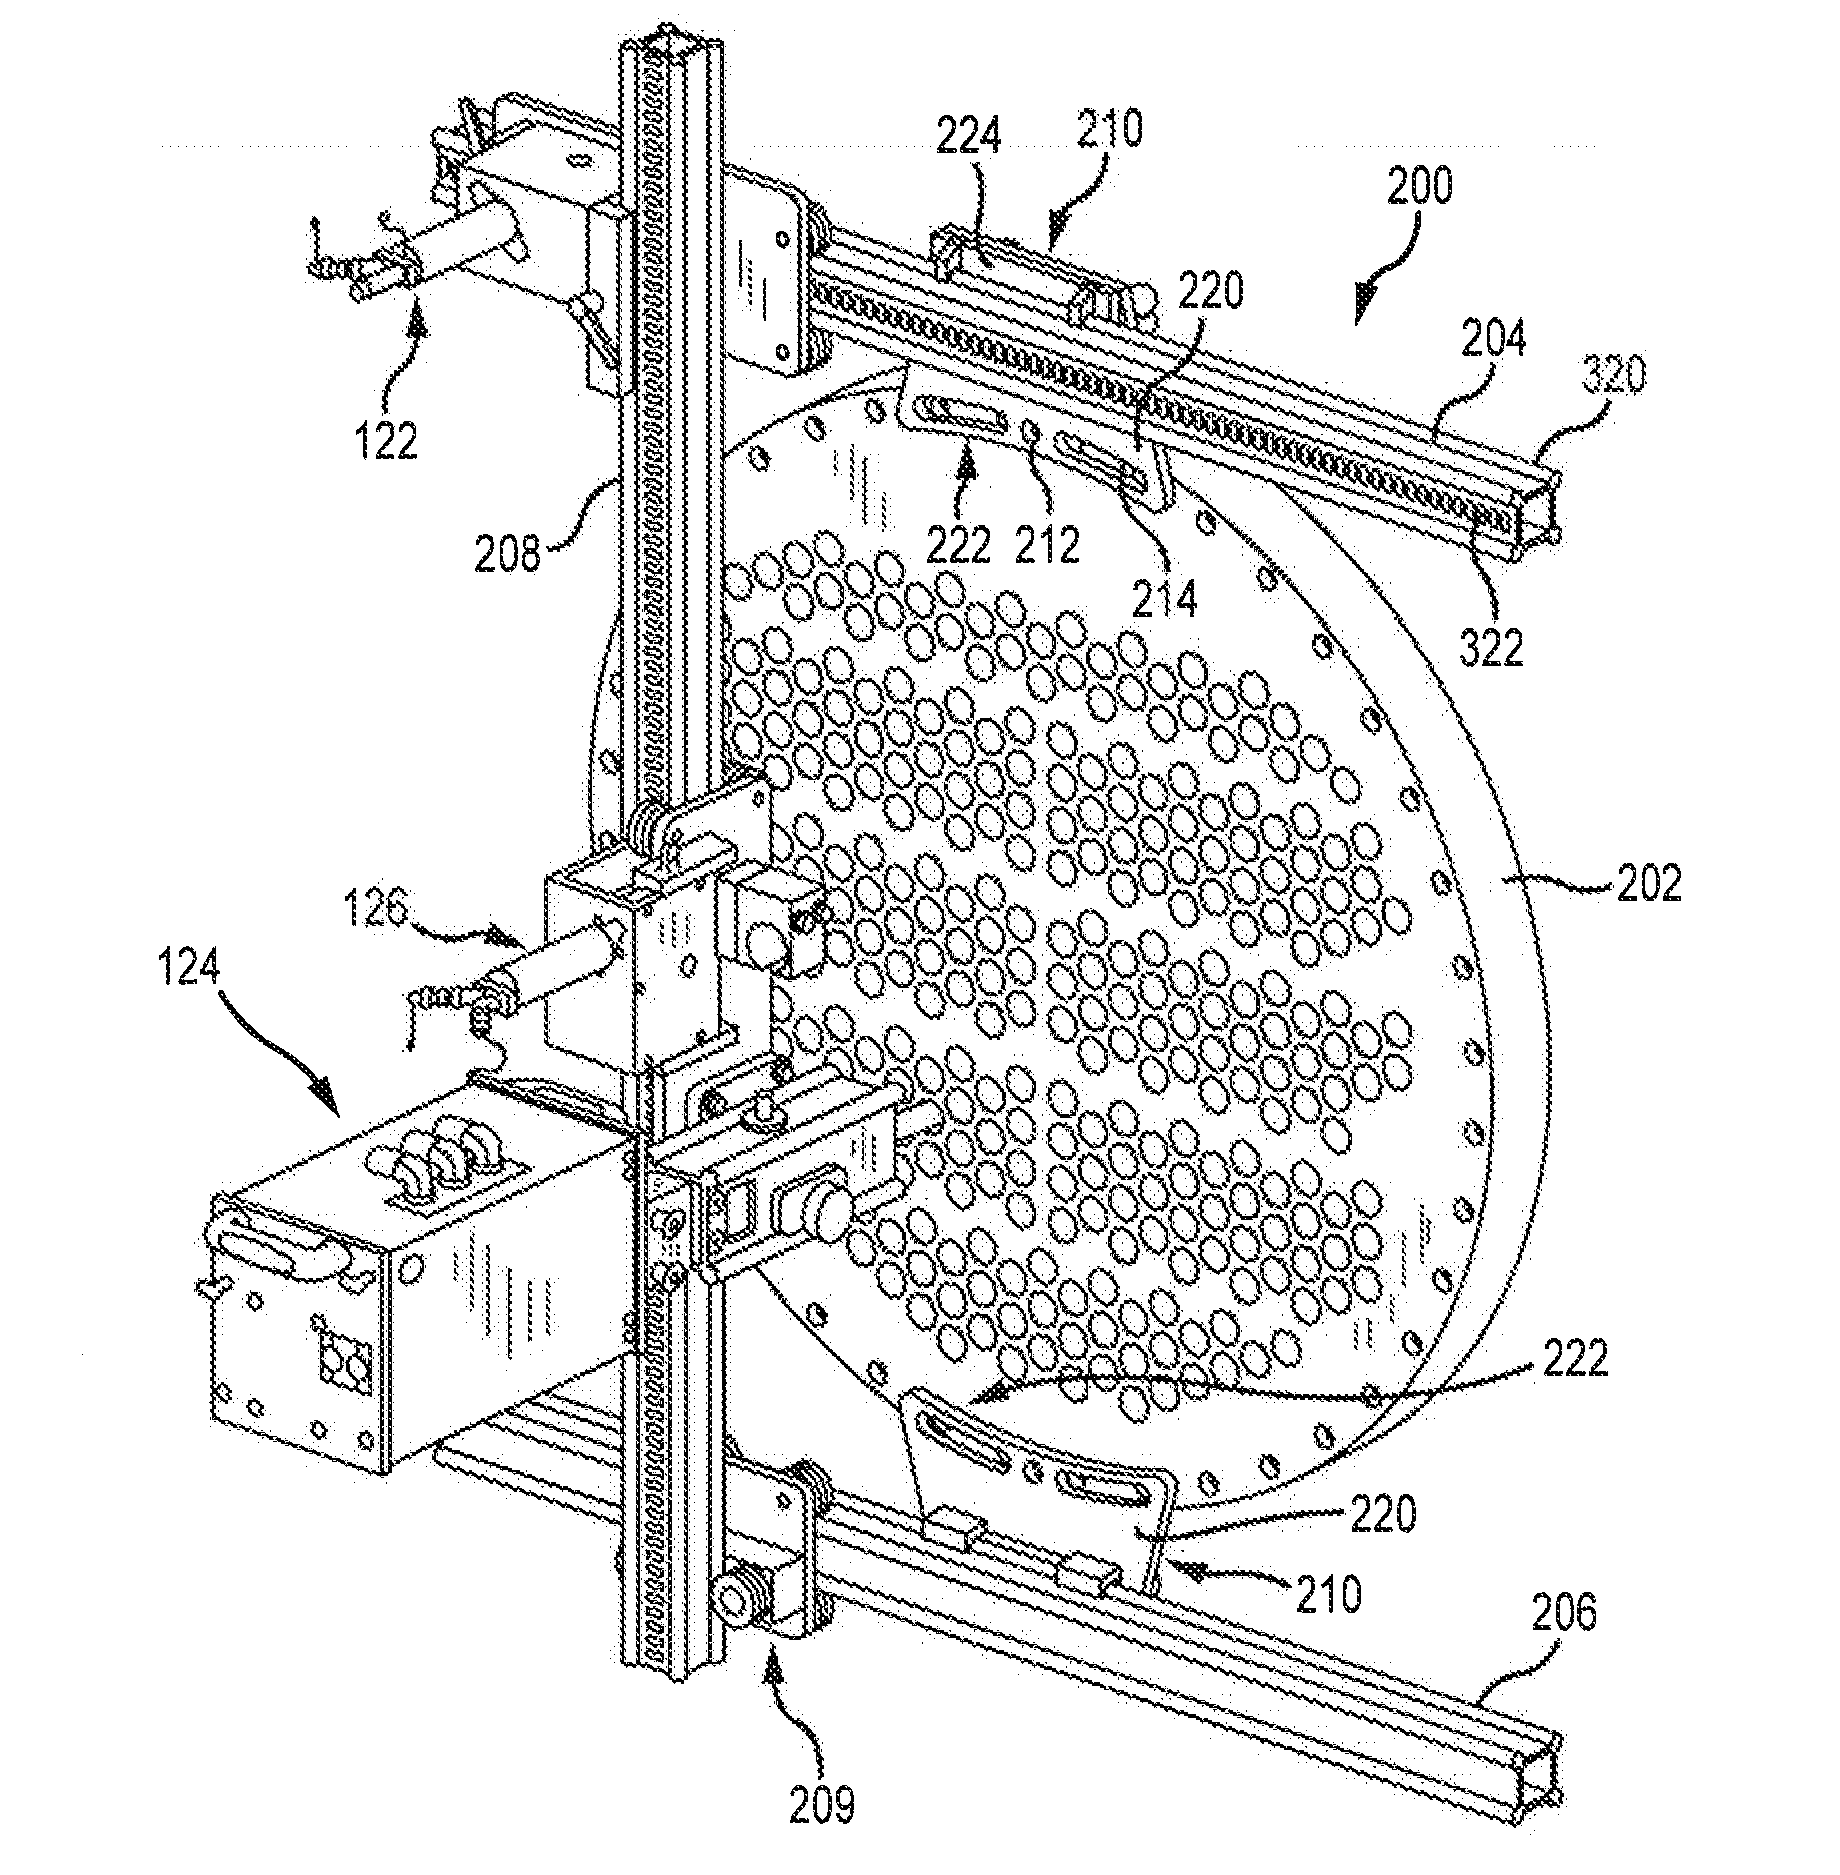 Flexible tube cleaning lance positioner frame apparatus